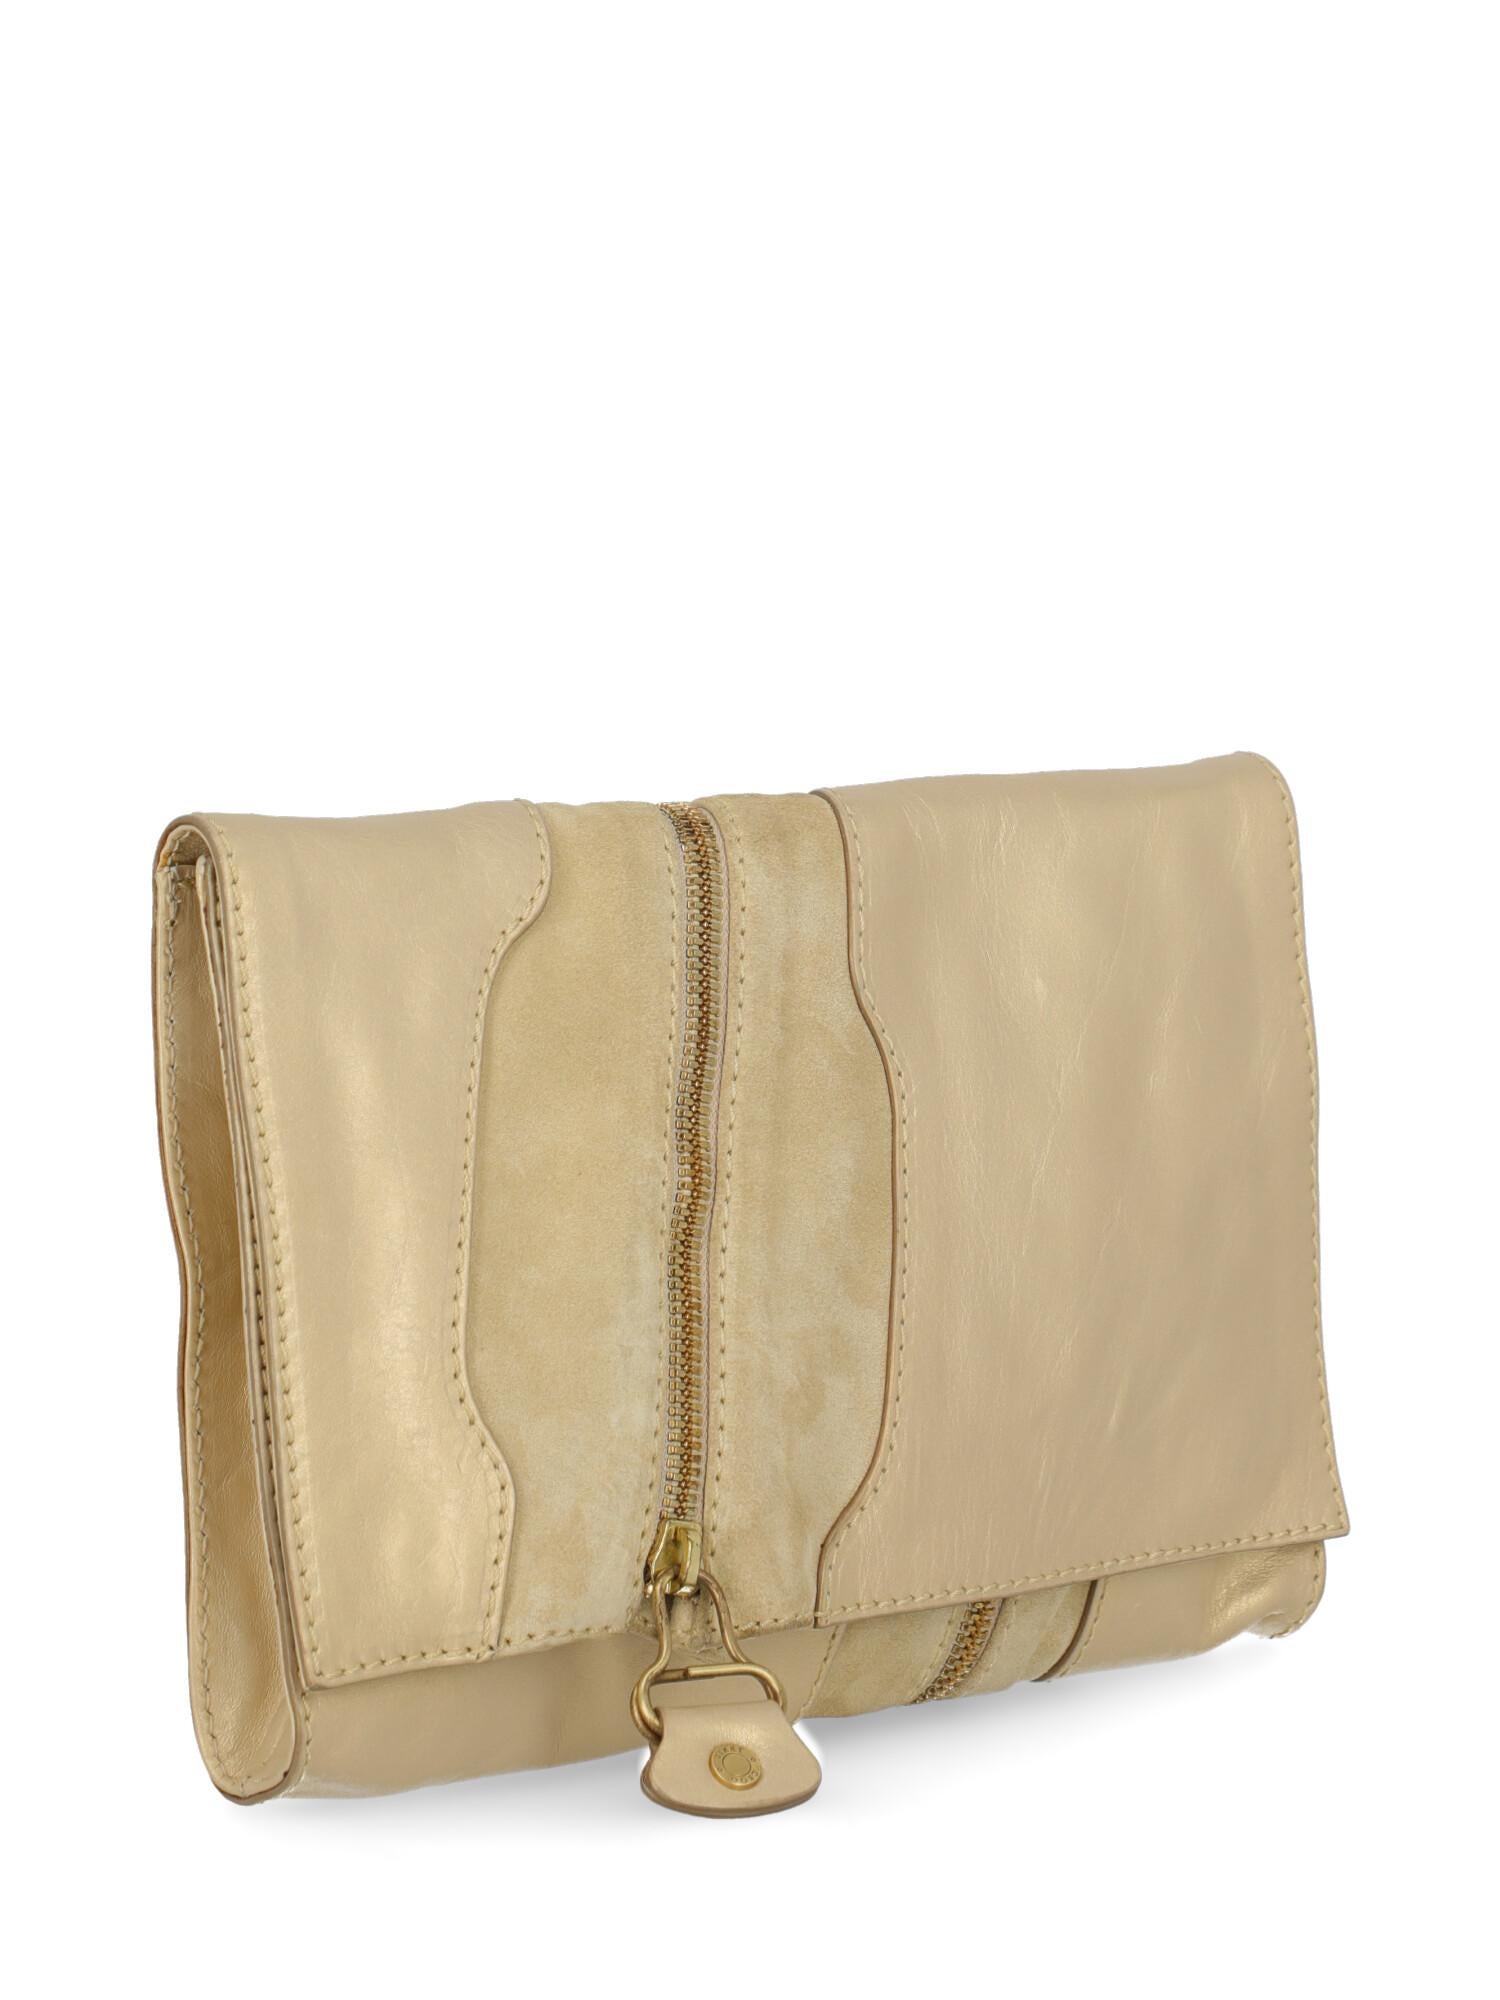 Jimmy Choo Woman Clutch bag Gold  In Fair Condition For Sale In Milan, IT